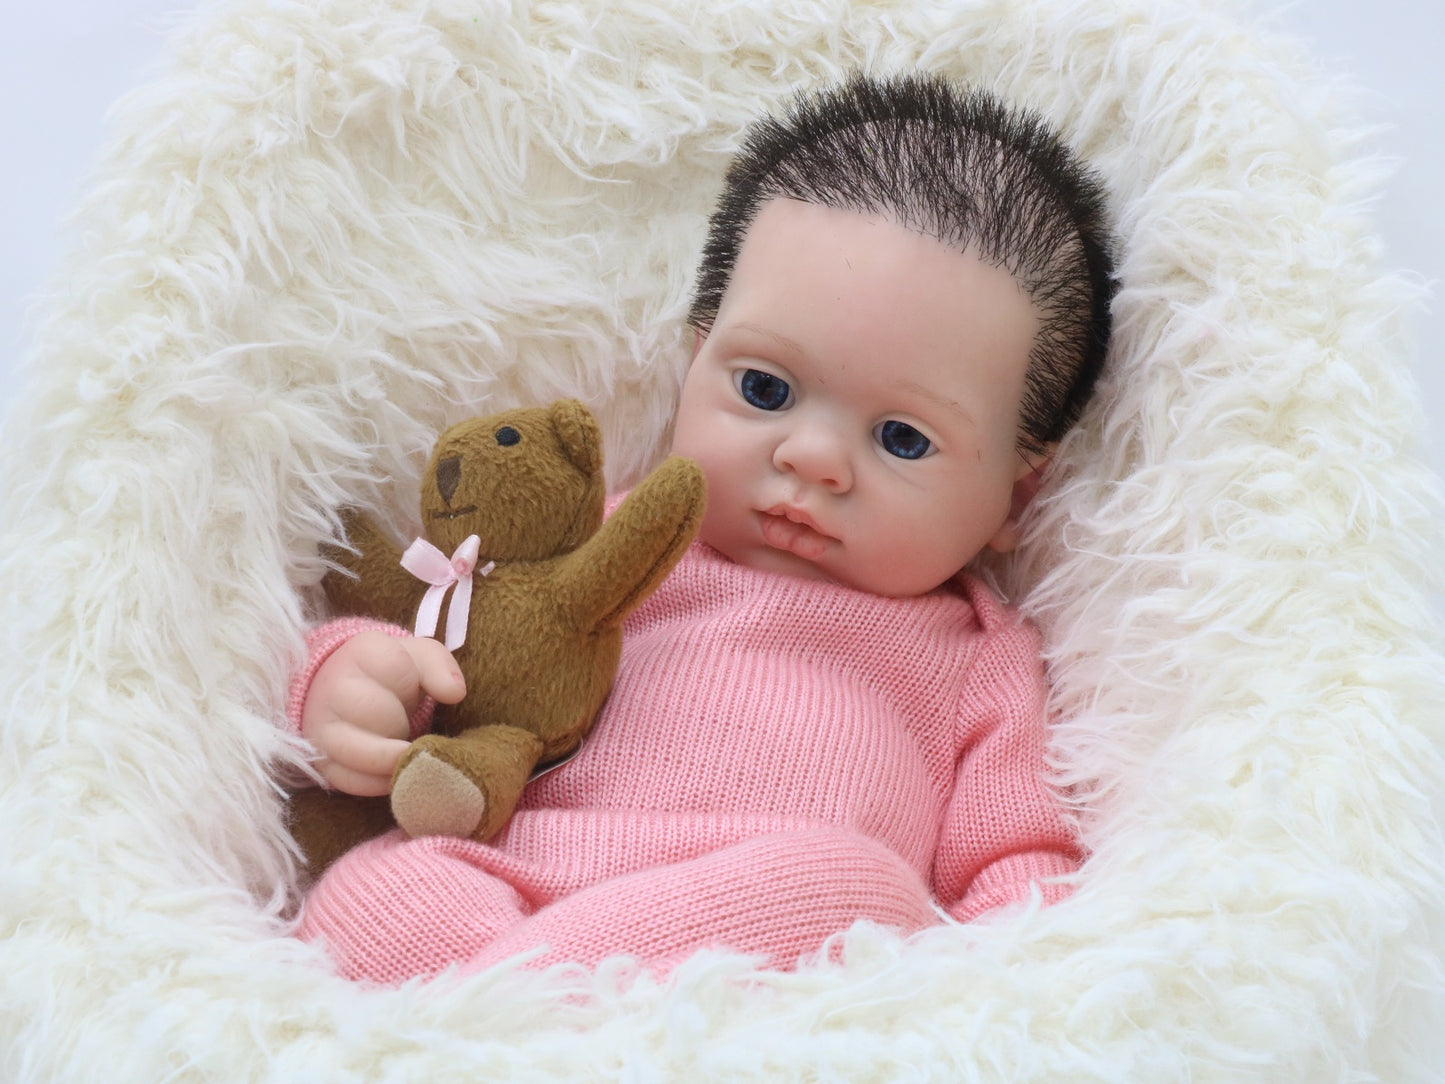 16 Inch high quality 100% platinum silicone reborn doll With Veins visible Birthday Present